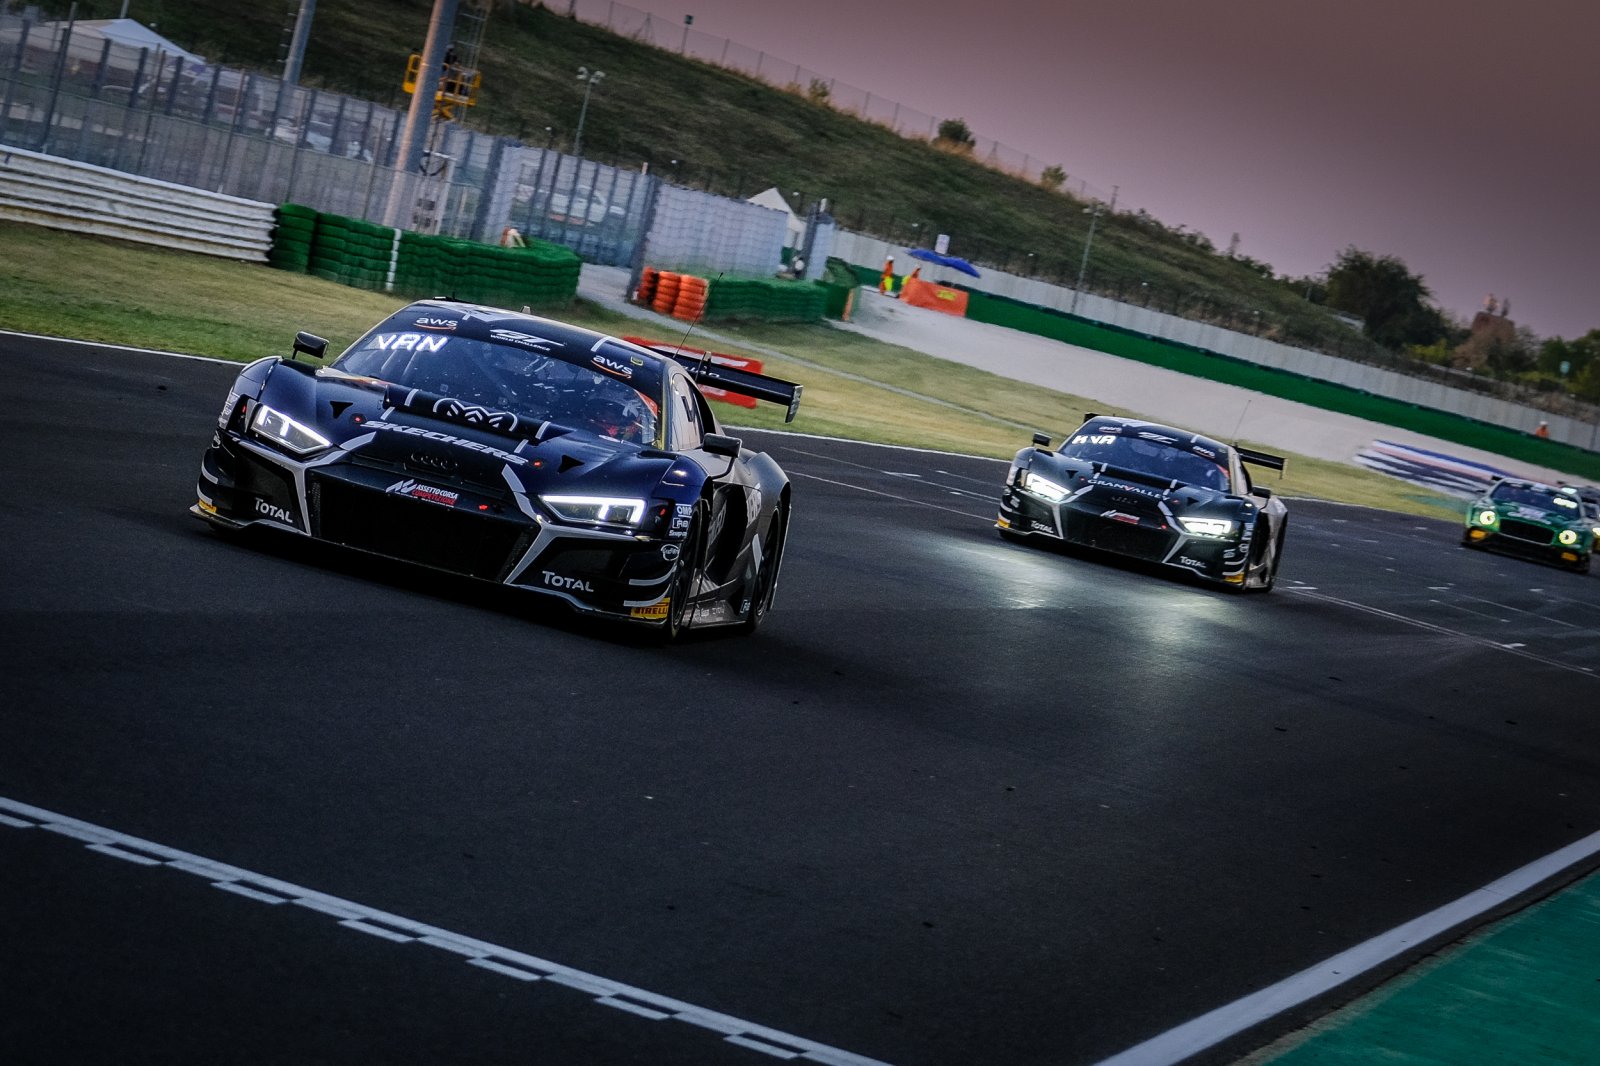 Belgian Audi Club Team WRT sweeps to one-two finish in opening Misano contest